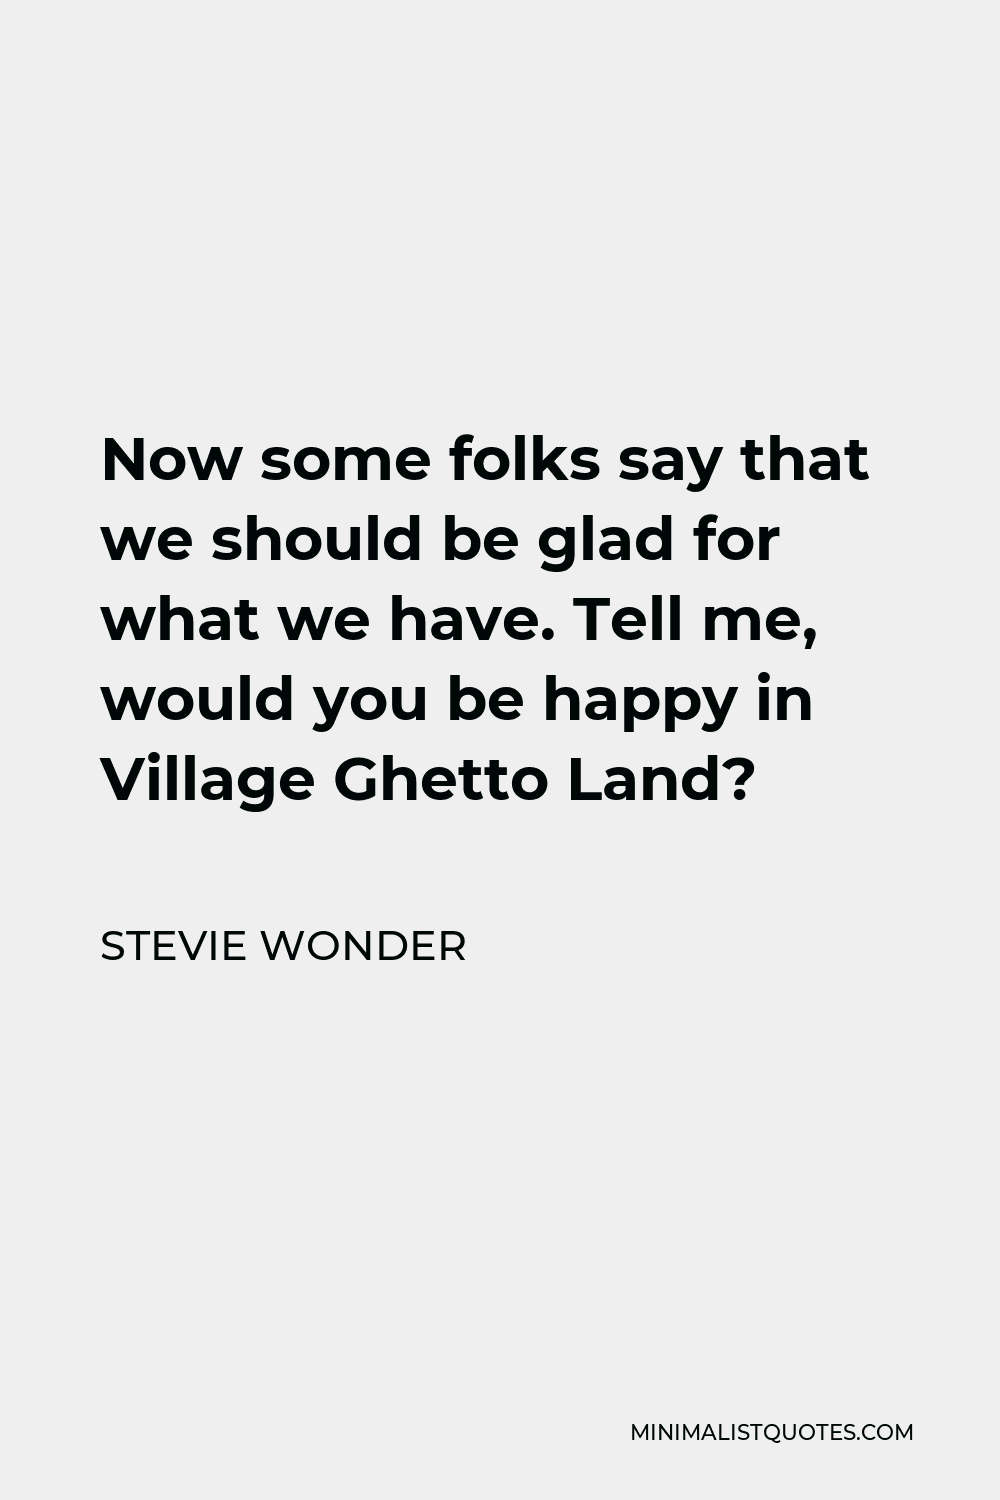 Stevie Wonder Quote - Now some folks say that we should be glad for what we have. Tell me, would you be happy in Village Ghetto Land?